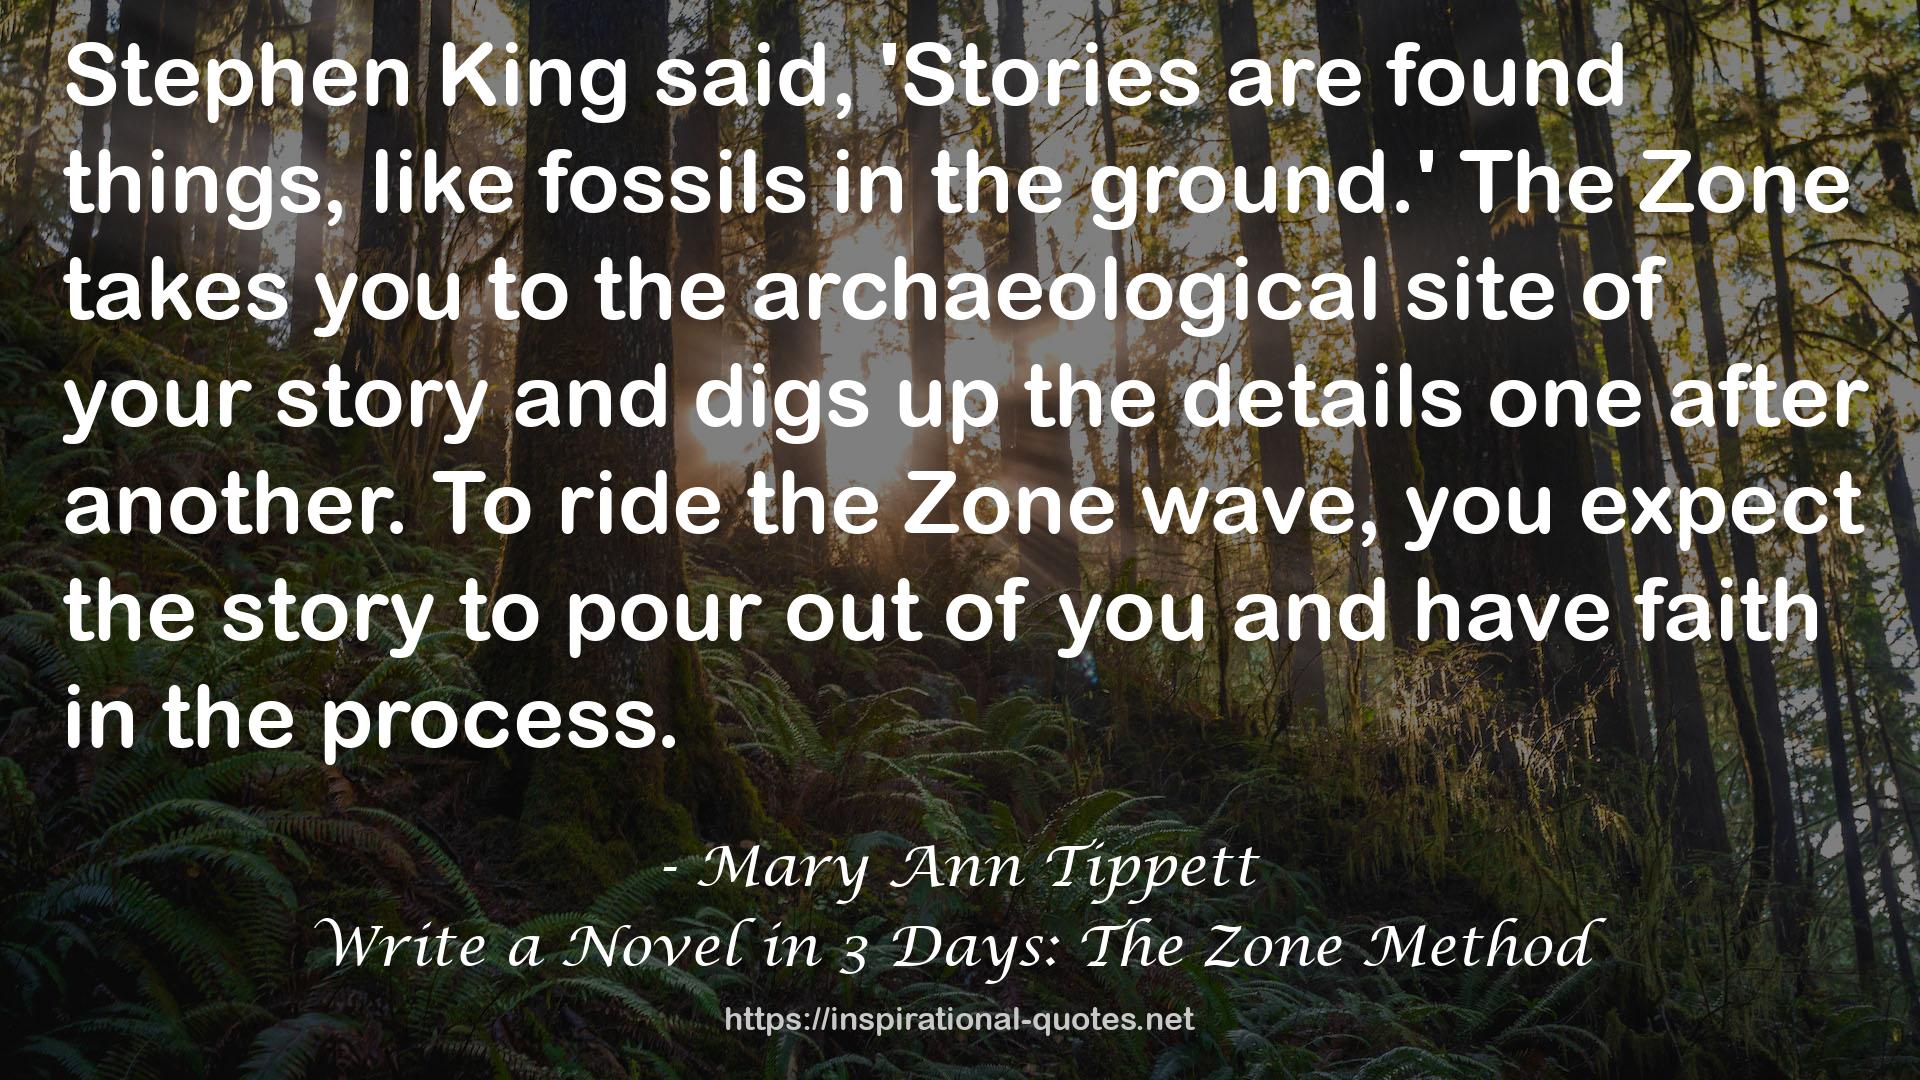 Mary Ann Tippett QUOTES